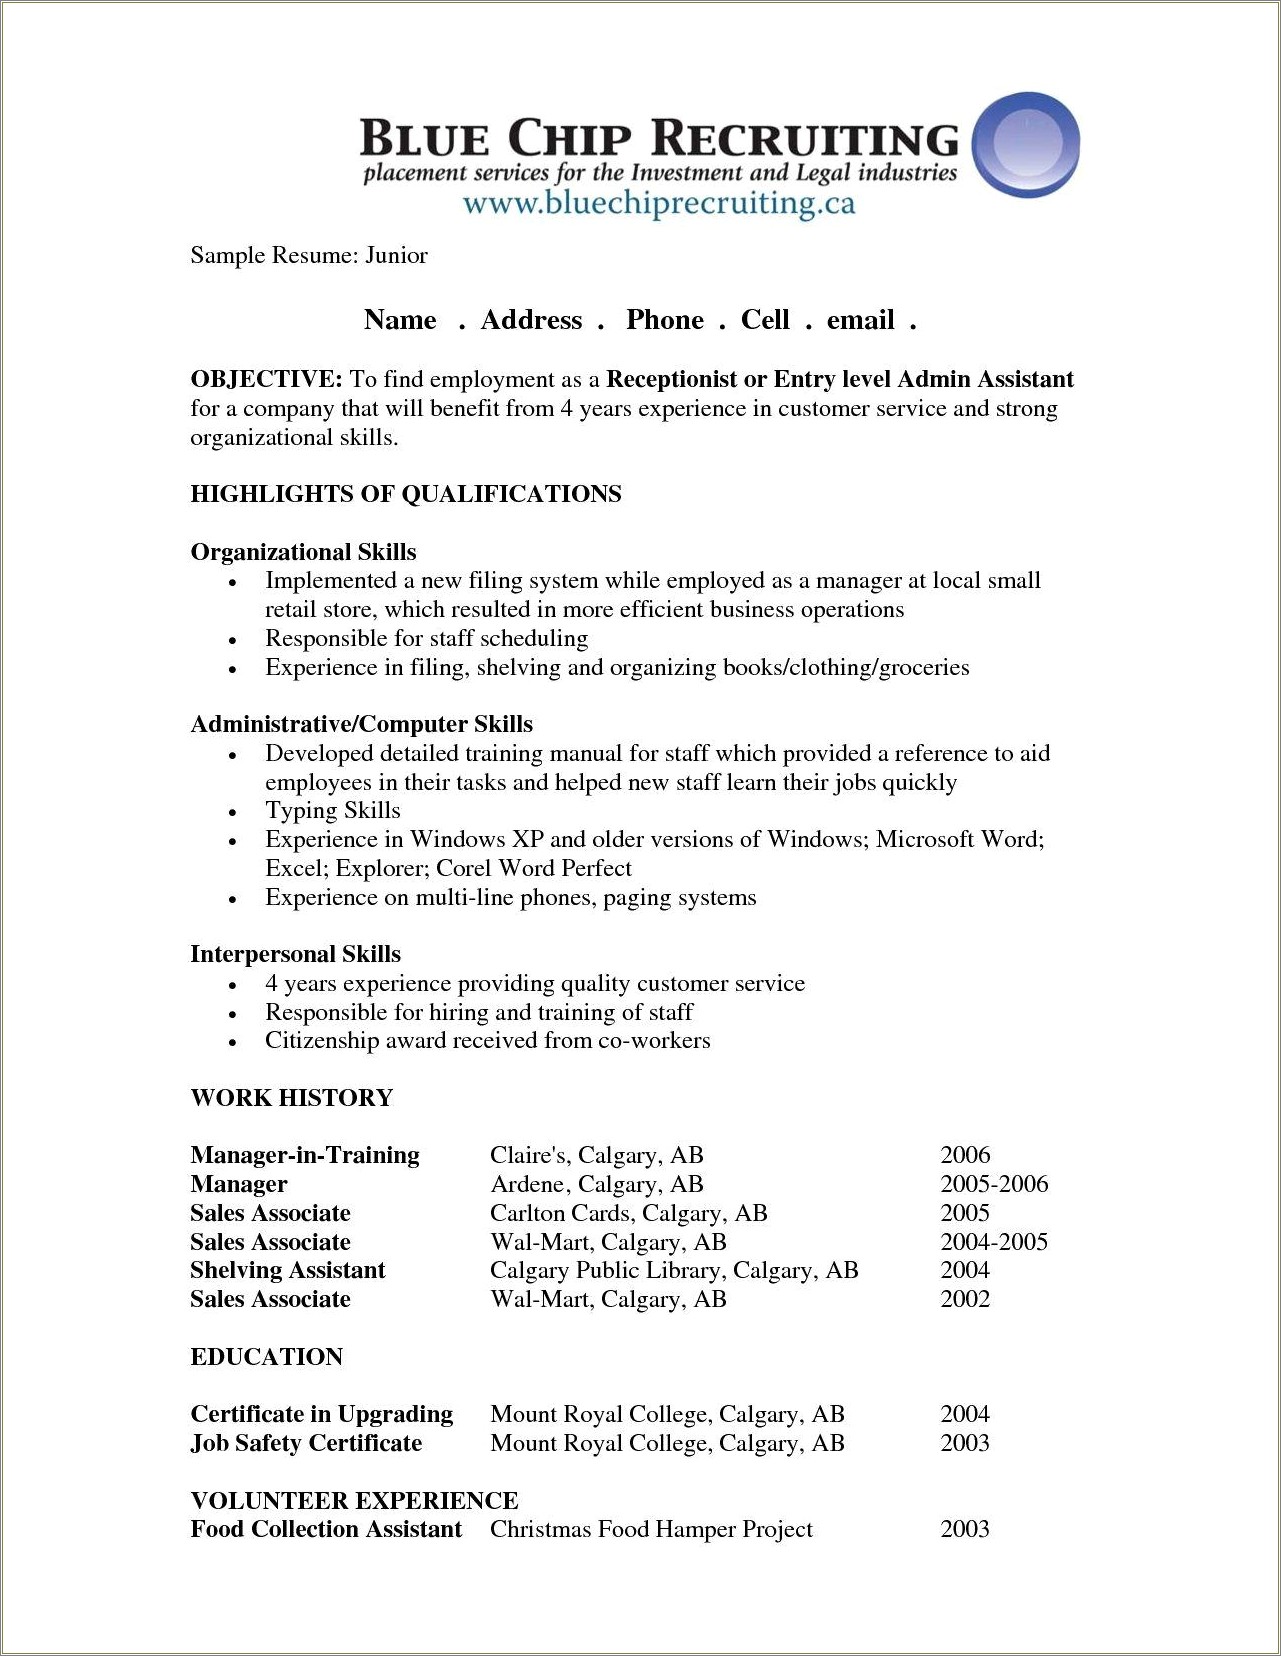 Resume Objective For Public Librarian